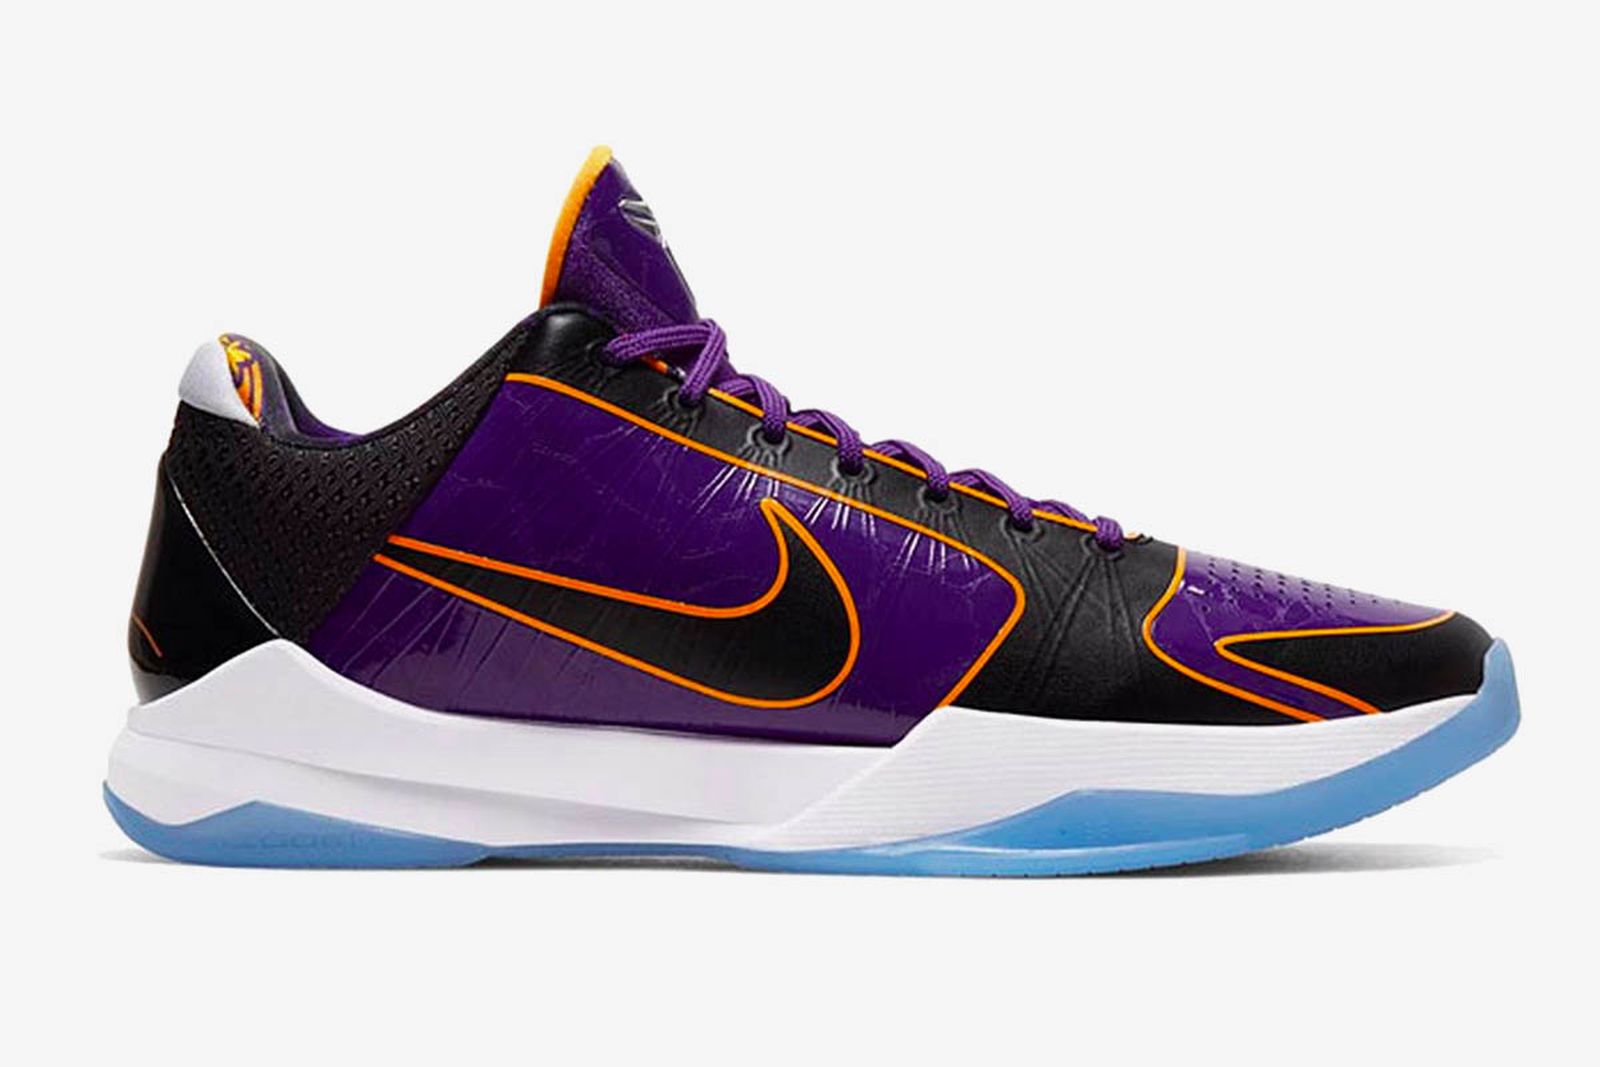 Nike Kobe Protro “Lakers”: Official Images & Info